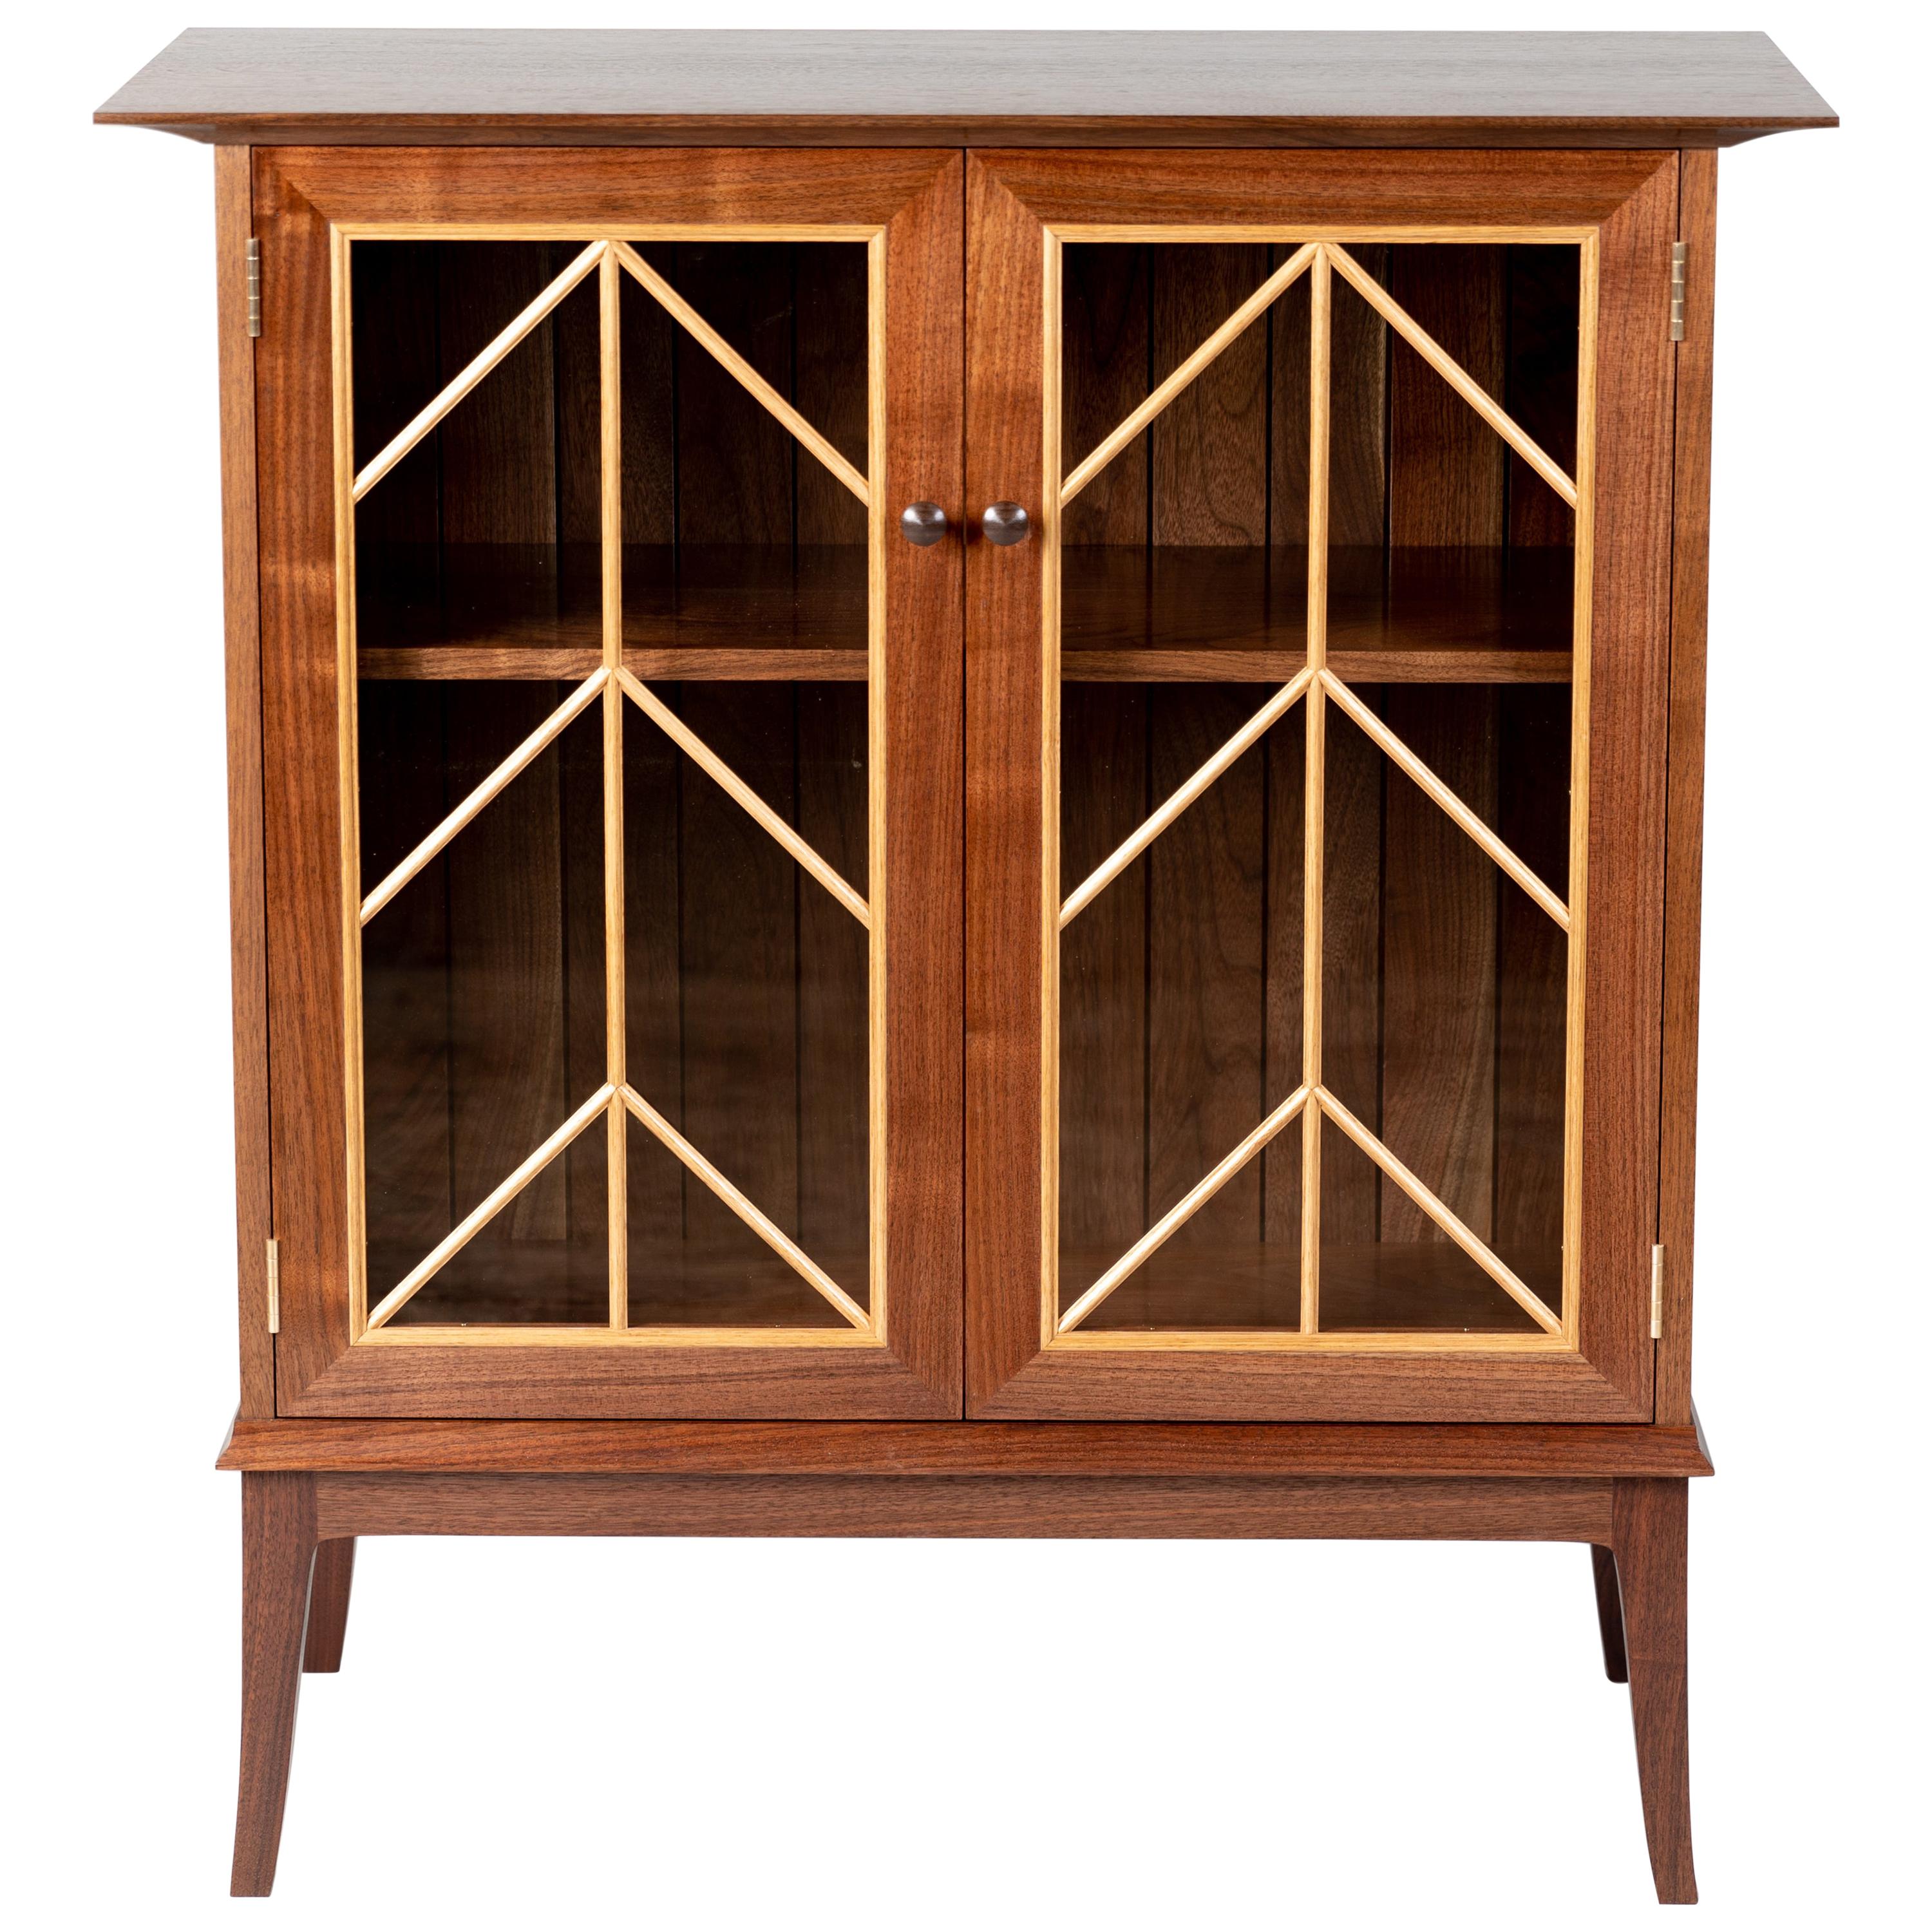 Contemporary Walnut Cabinet with Glass Doors and Butternut Details